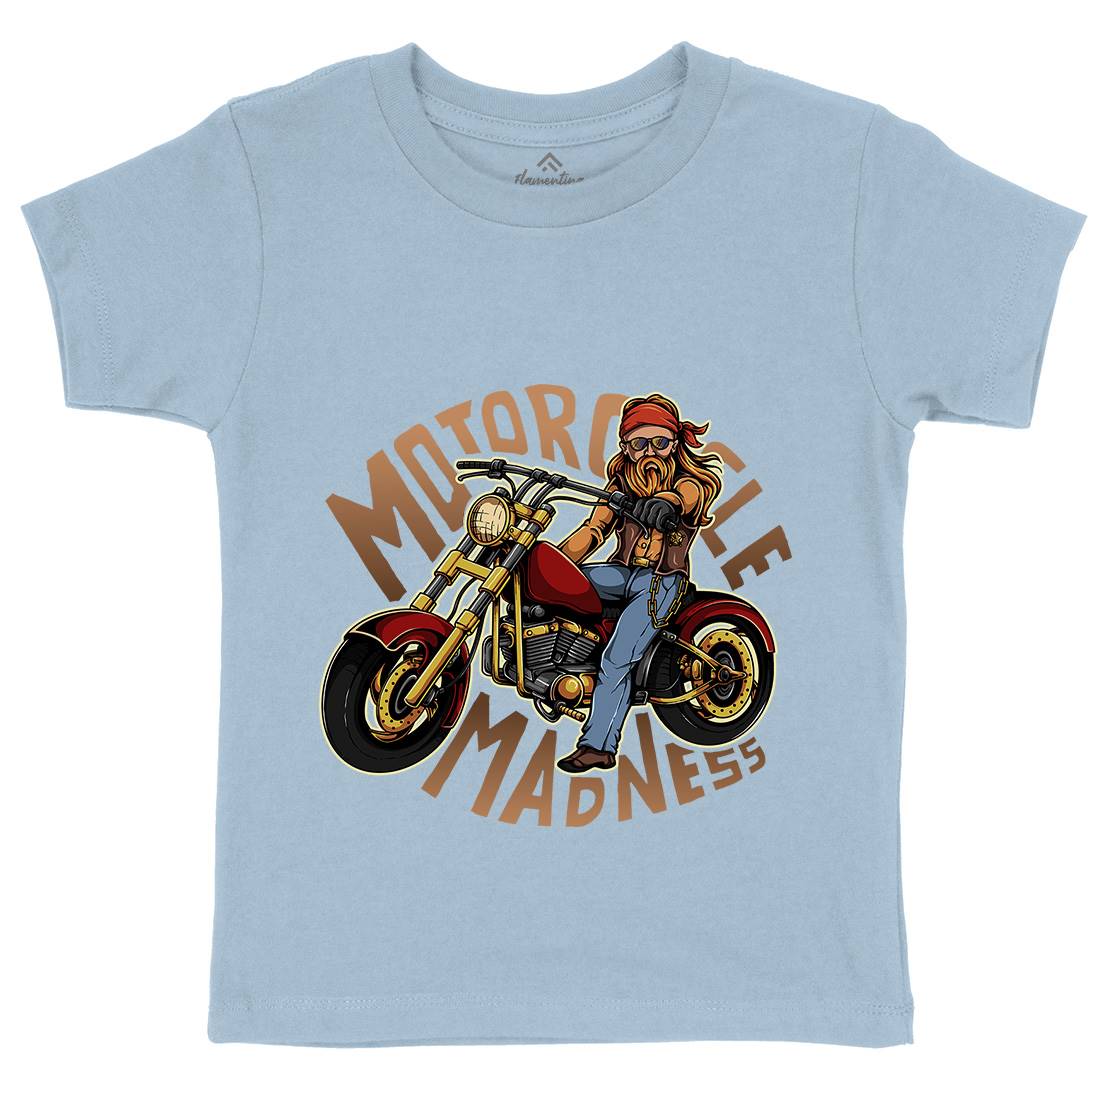 Madness Kids Crew Neck T-Shirt Motorcycles A438